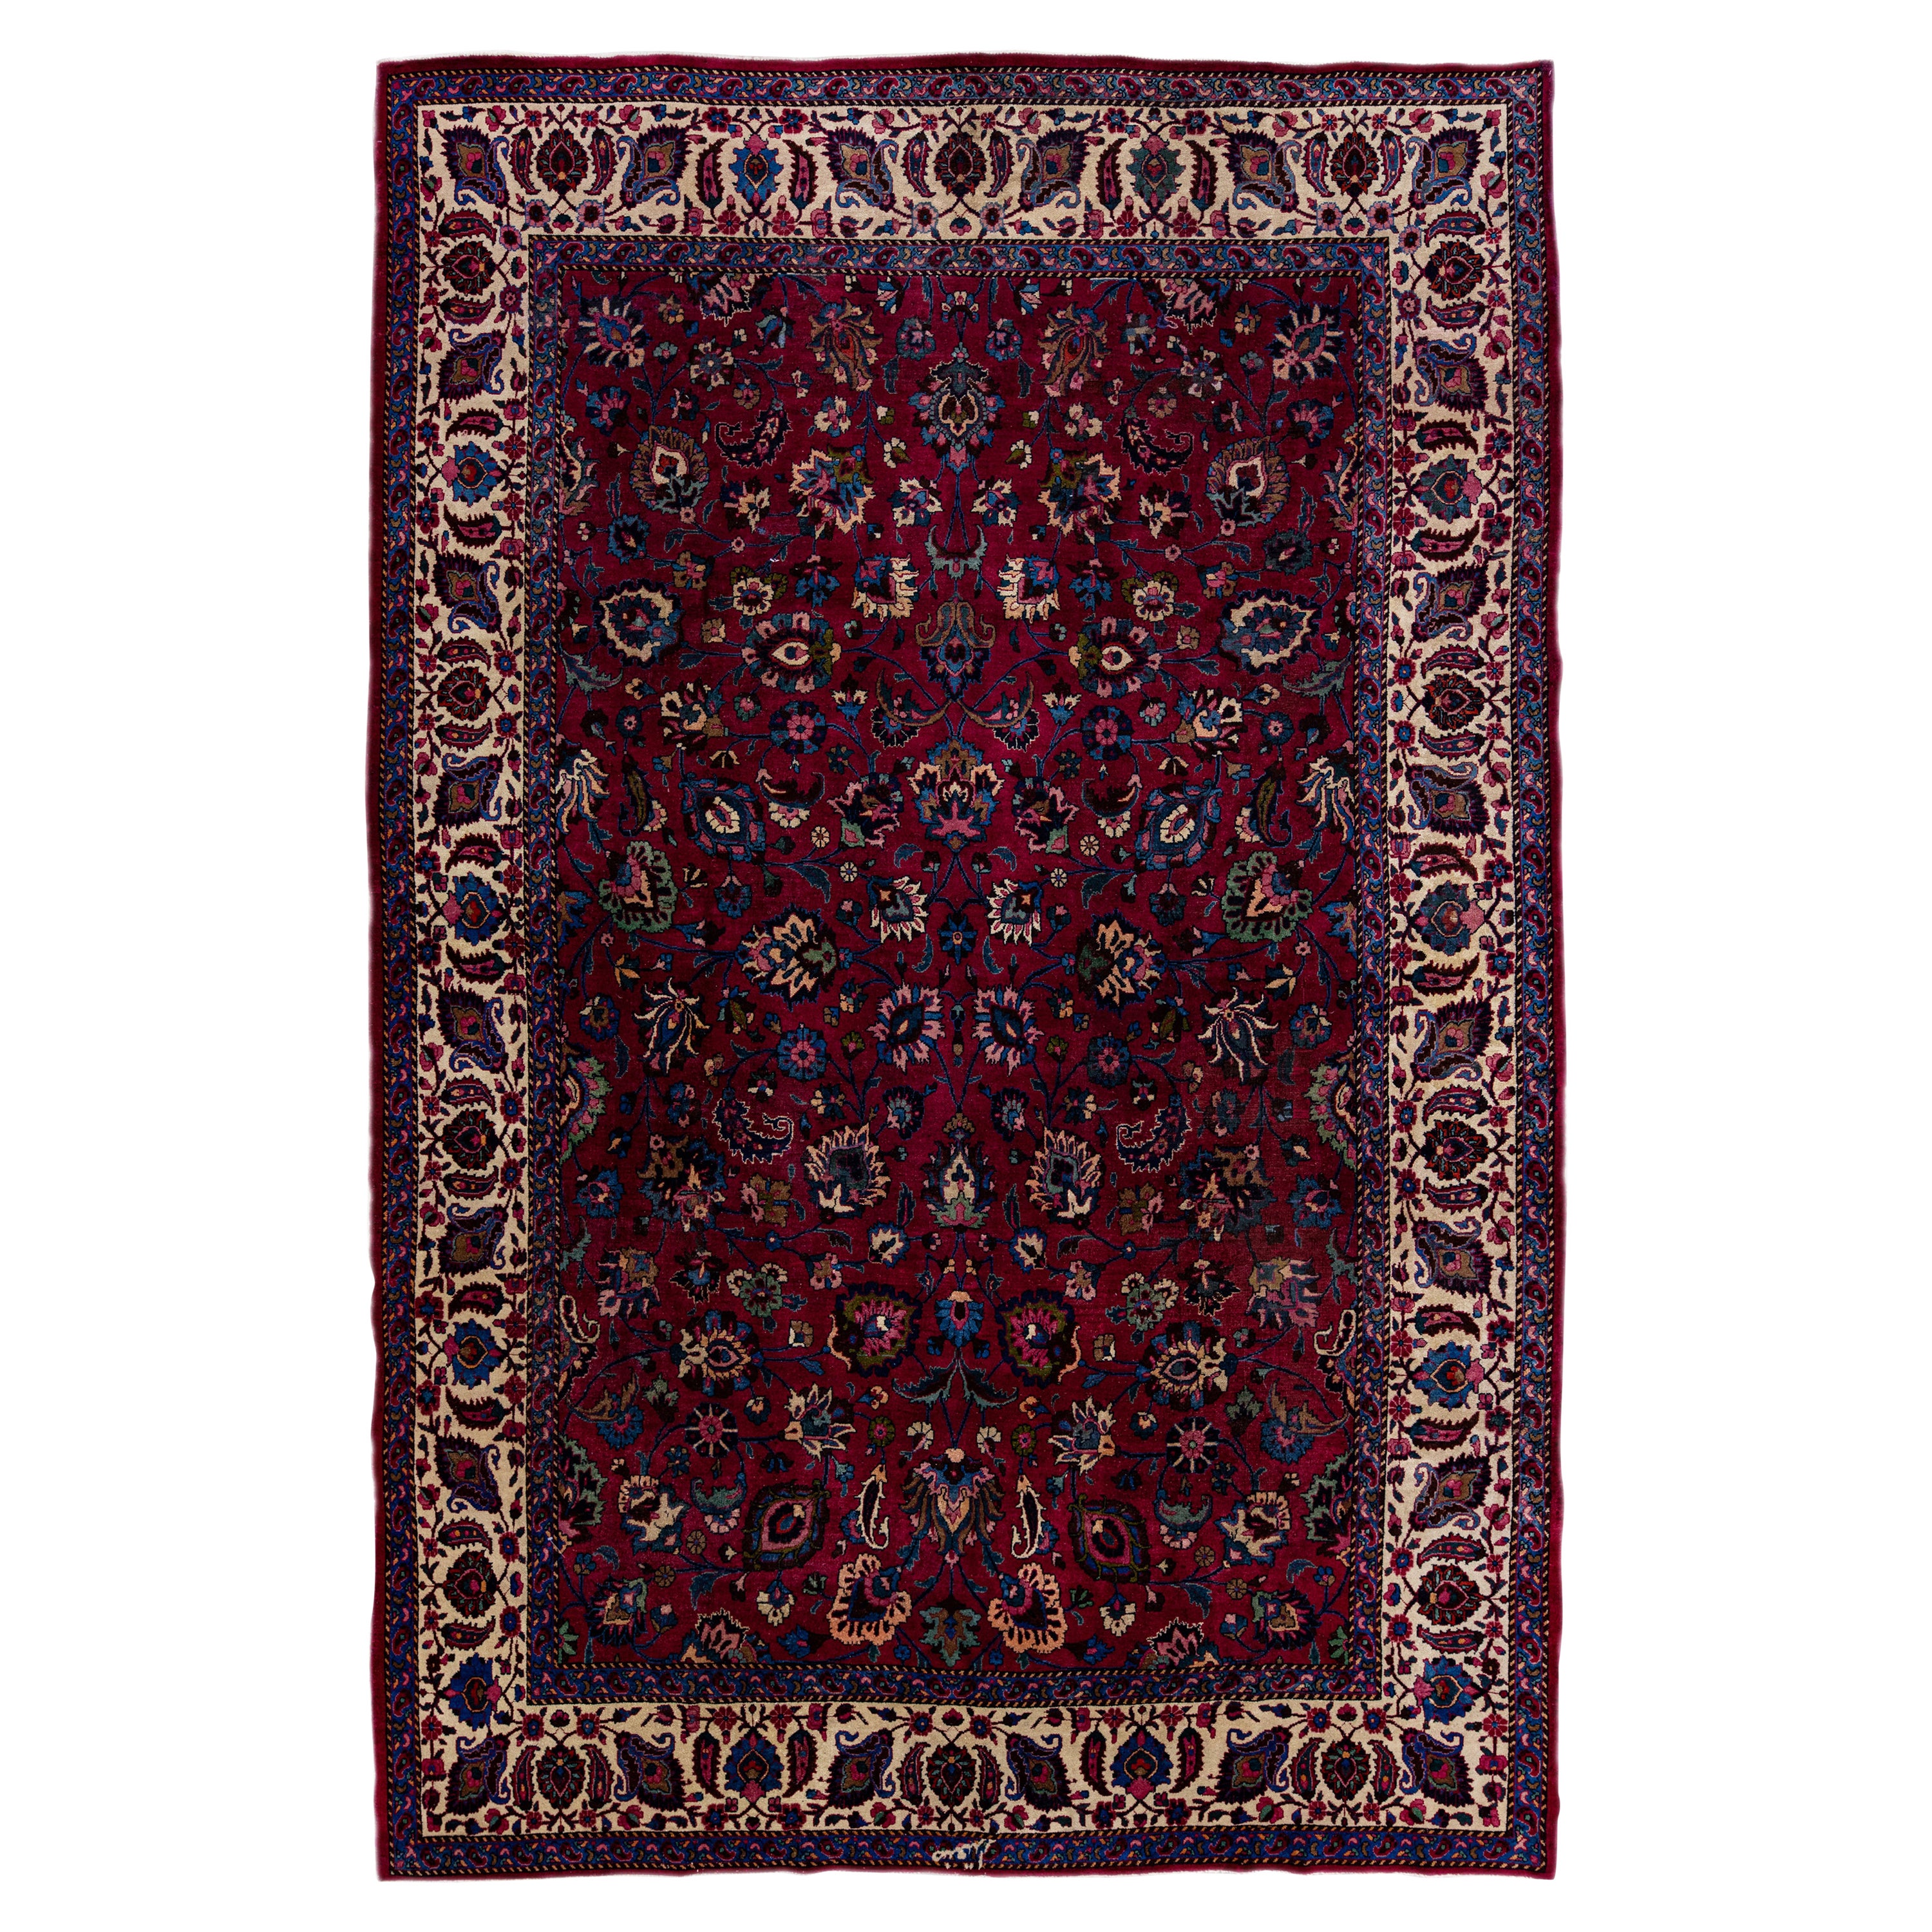 Antique Mashad Handmade Allover Floral Red Wool Rug